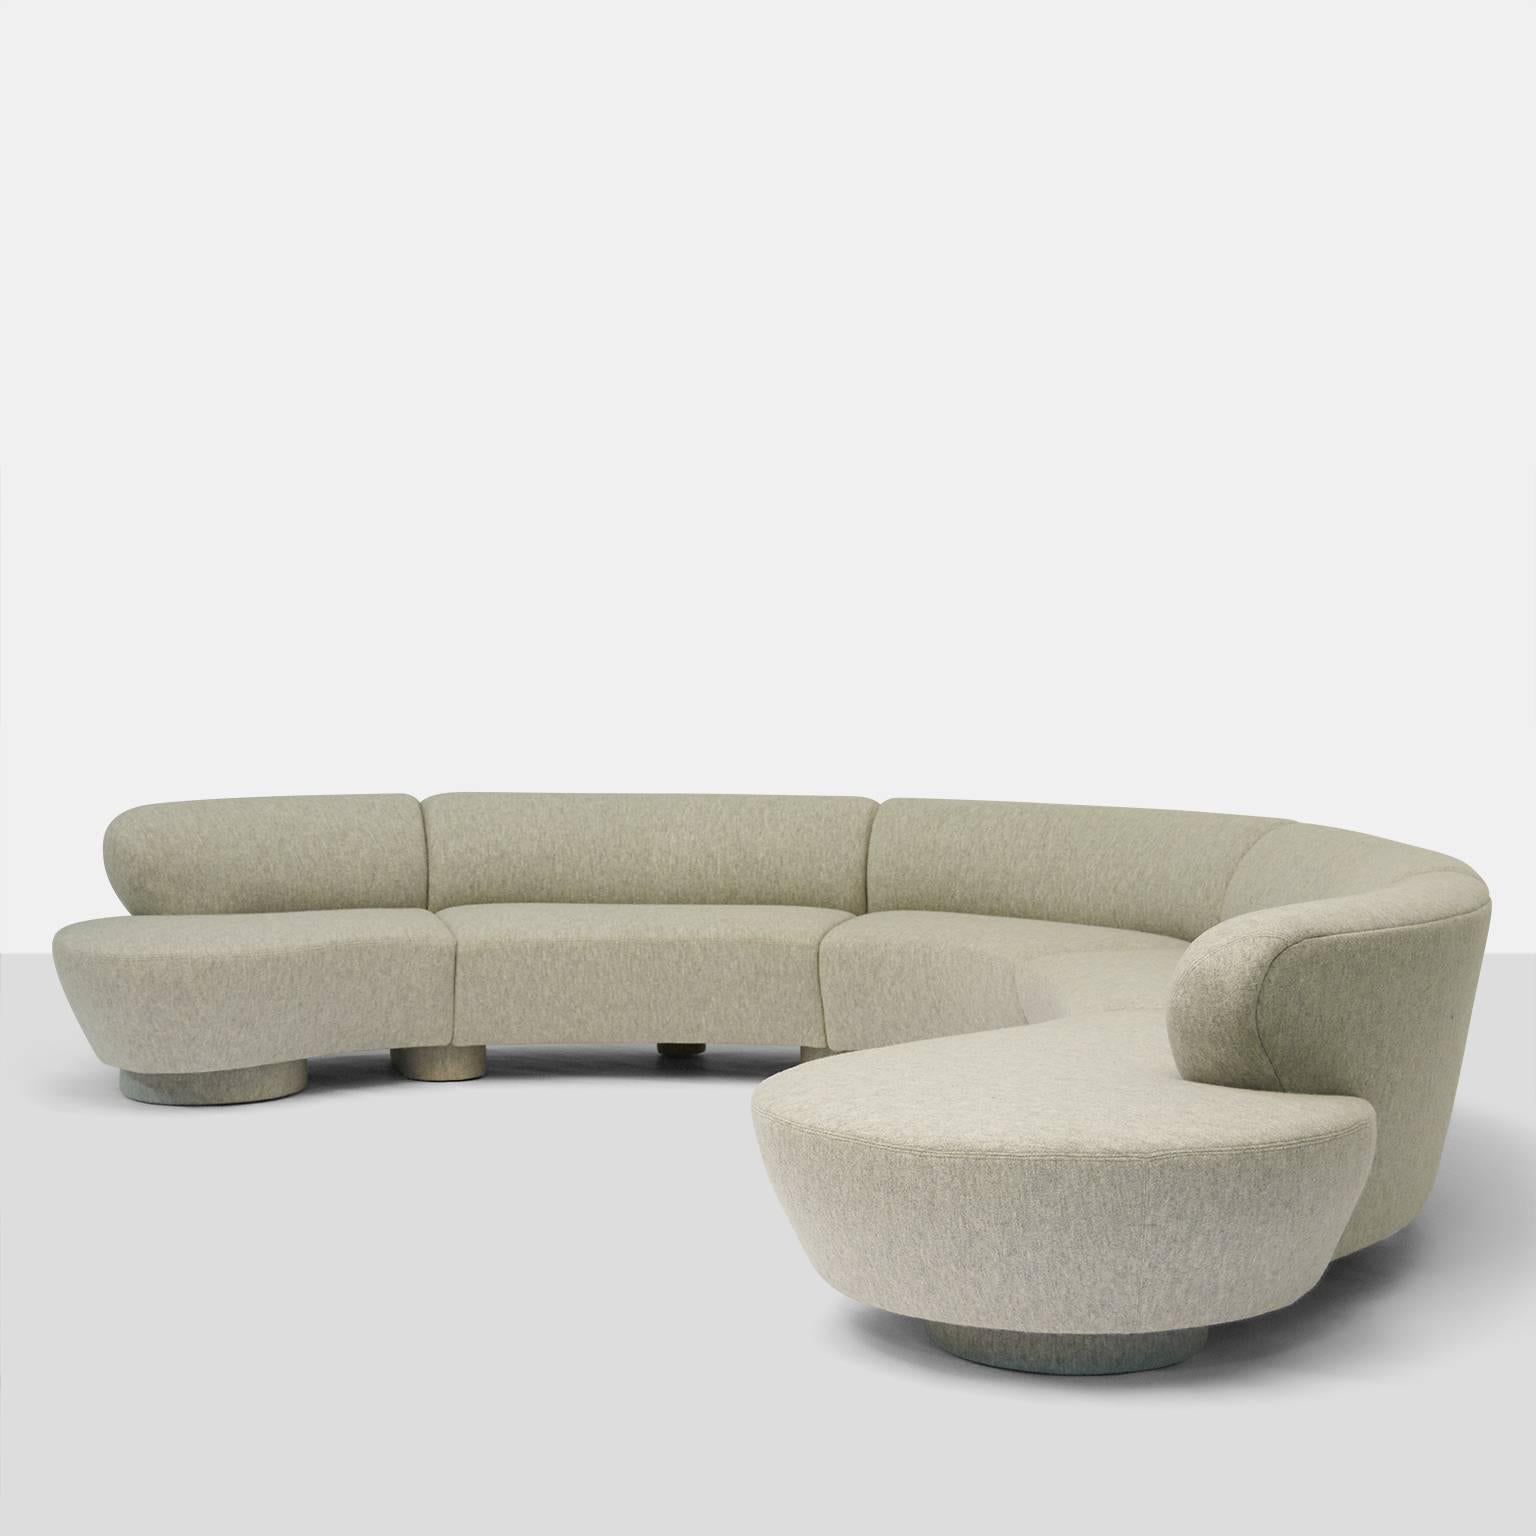 A five piece serpentine shaped cloud sectional for Directional made in the 1970s. By rearranging pieces, the sectional can be changed into multiple different shapes. Professional restored in a luxuriously soft light gray boiled wool fabric from the